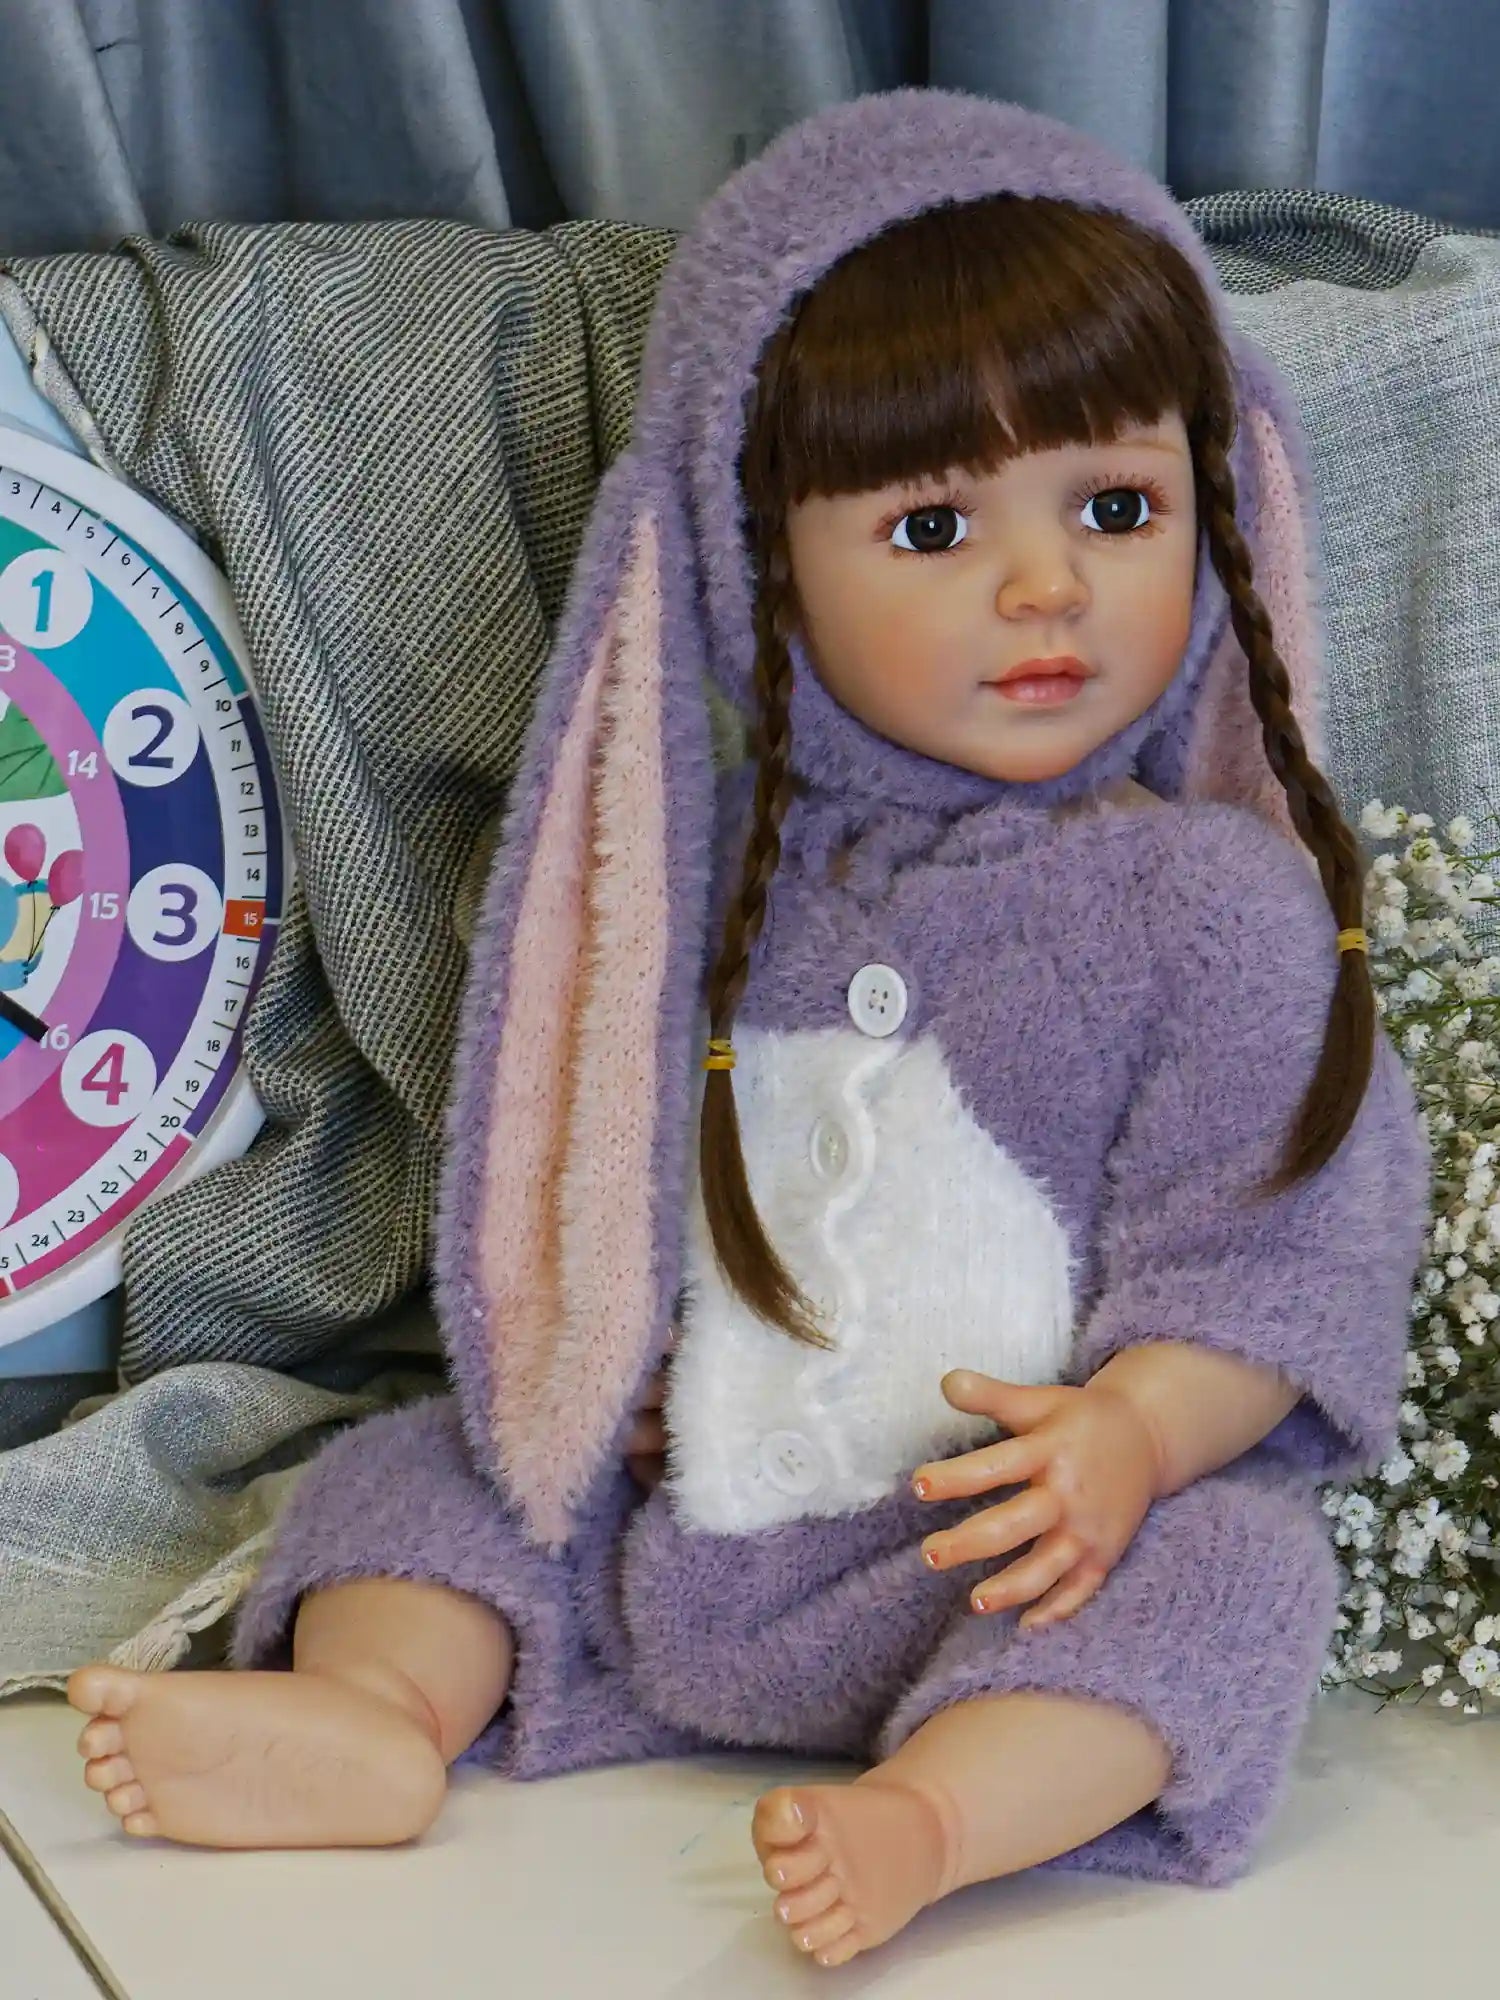 Realistic doll styled as a toddler, with braided brown hair and a serene face, dressed in a soft purple bunny suit, complete with floppy ears and white belly detail.